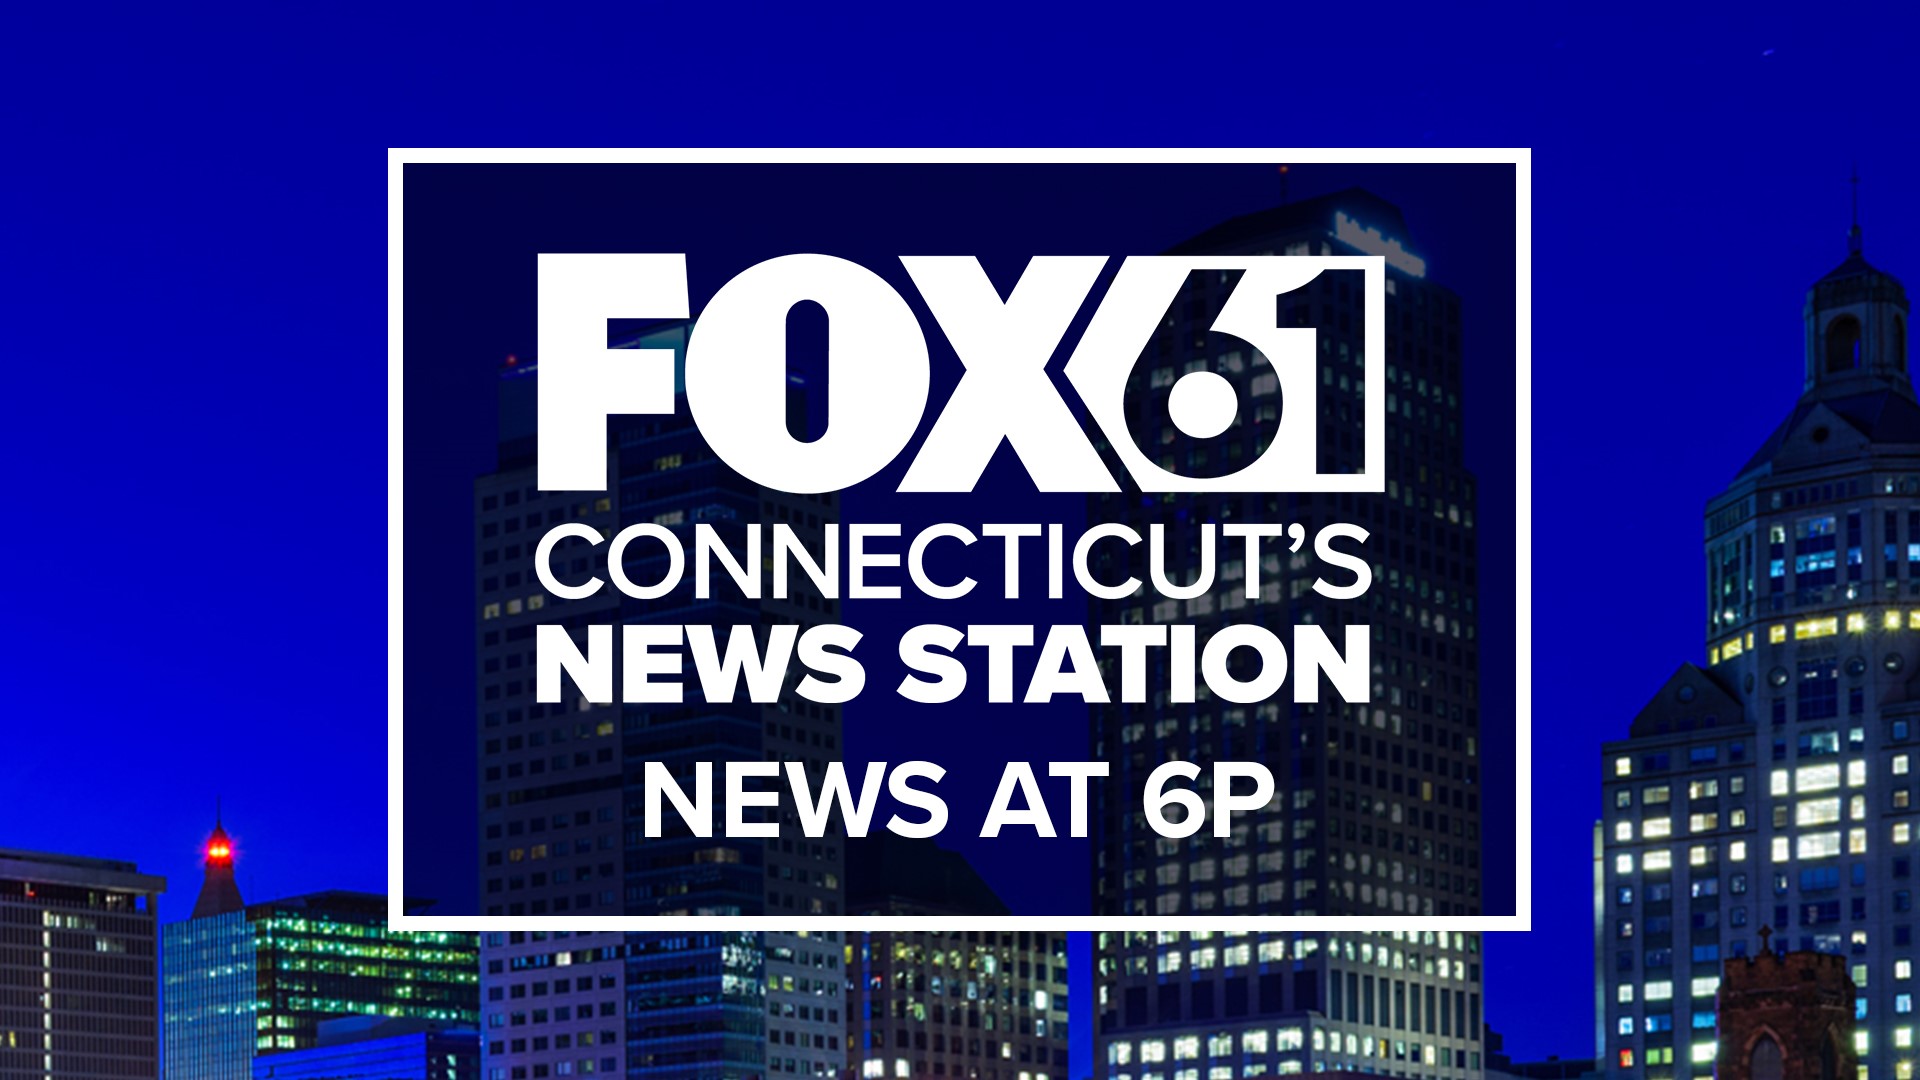 These are Connecticut's top news stories for 6 p.m. on March 19, 2024